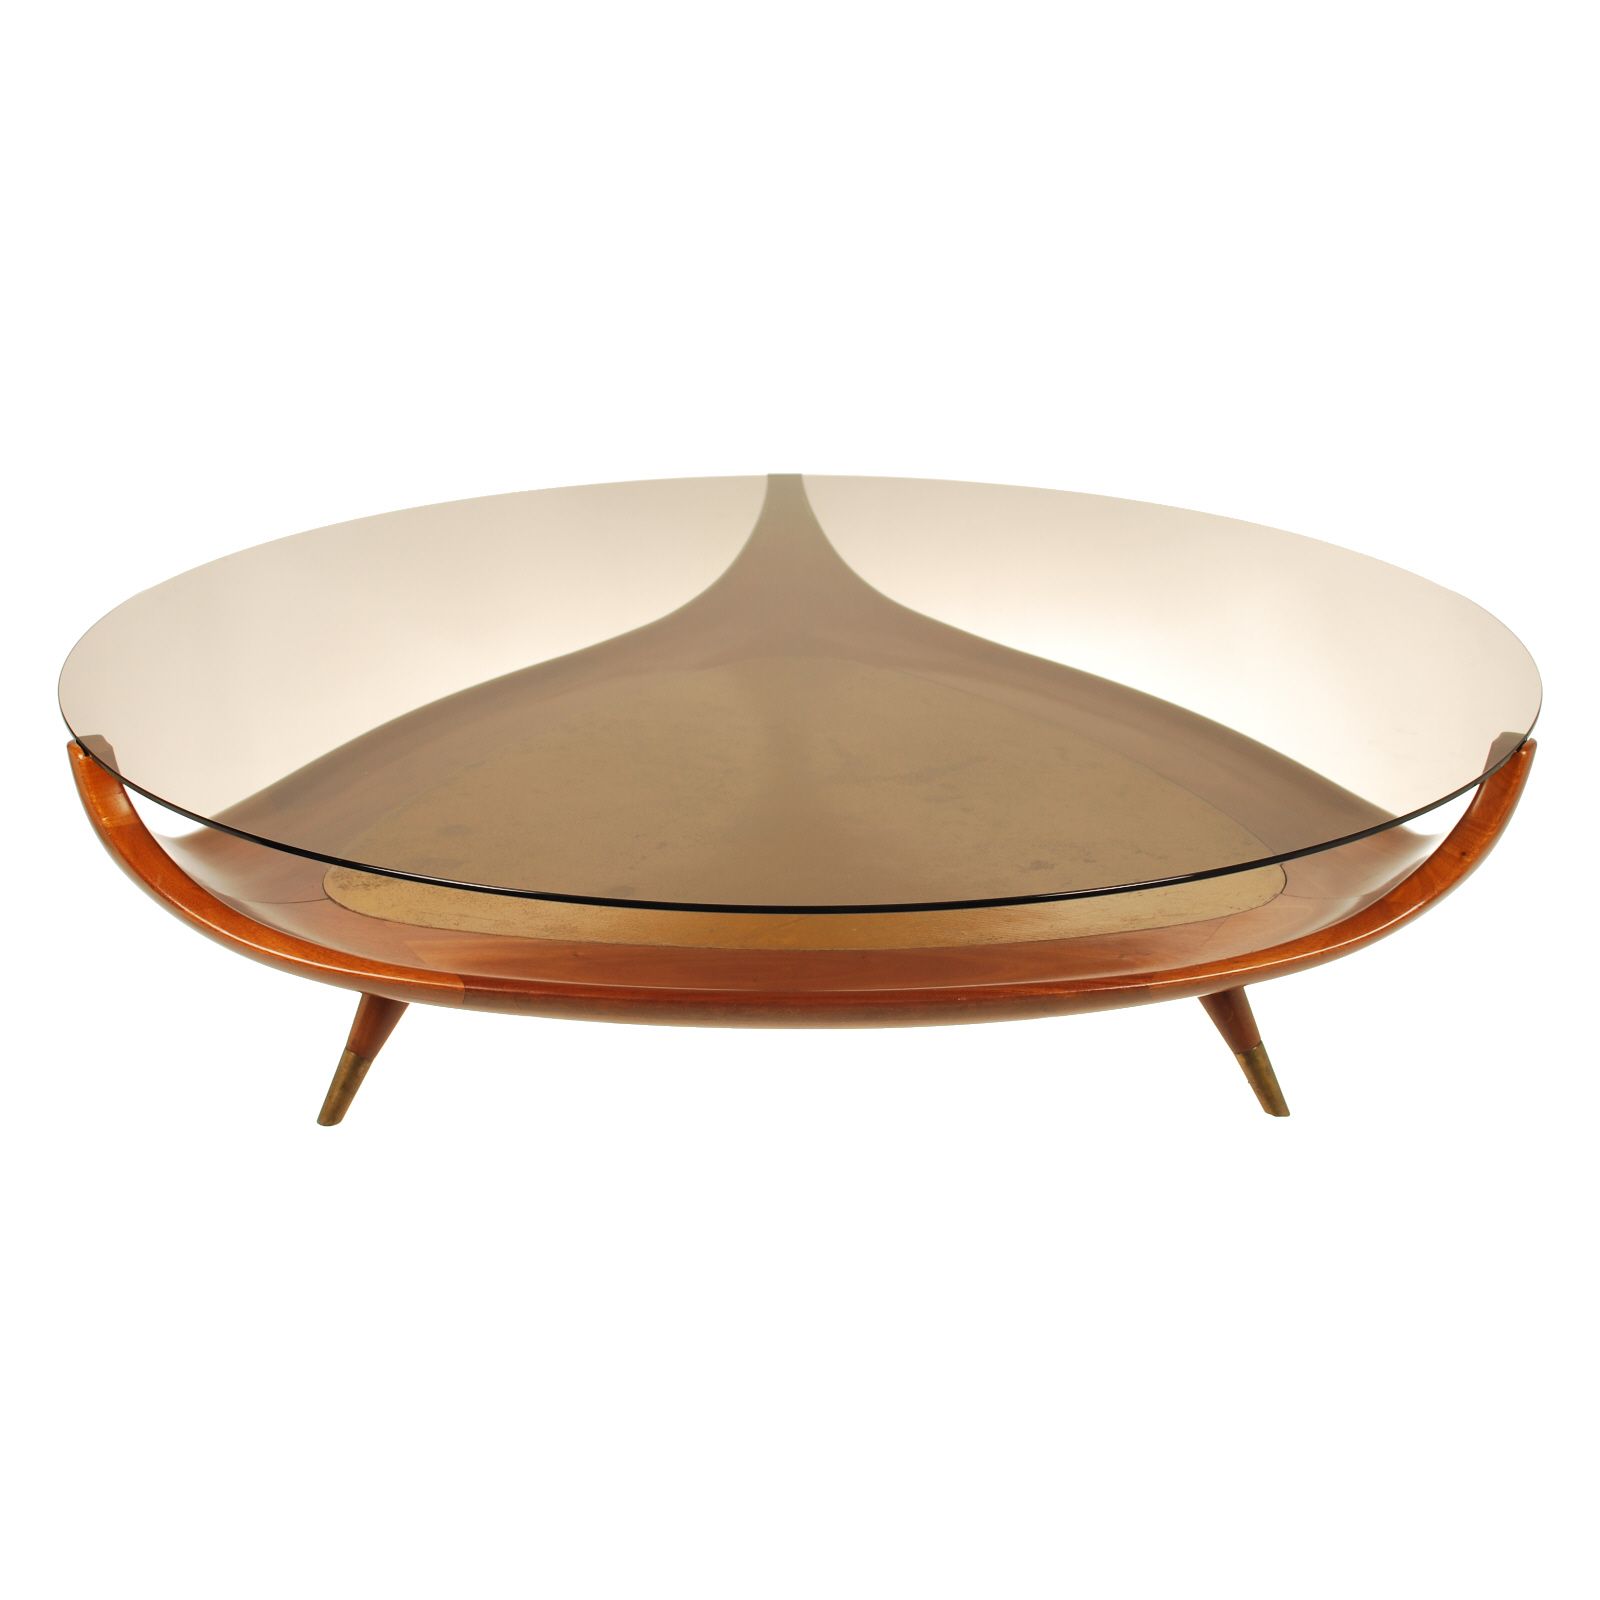 Round Glass And Wood Coffee Table Steve Silver Rafael Round Cherry Wood And Glass Coffee Table Triangle (View 7 of 10)